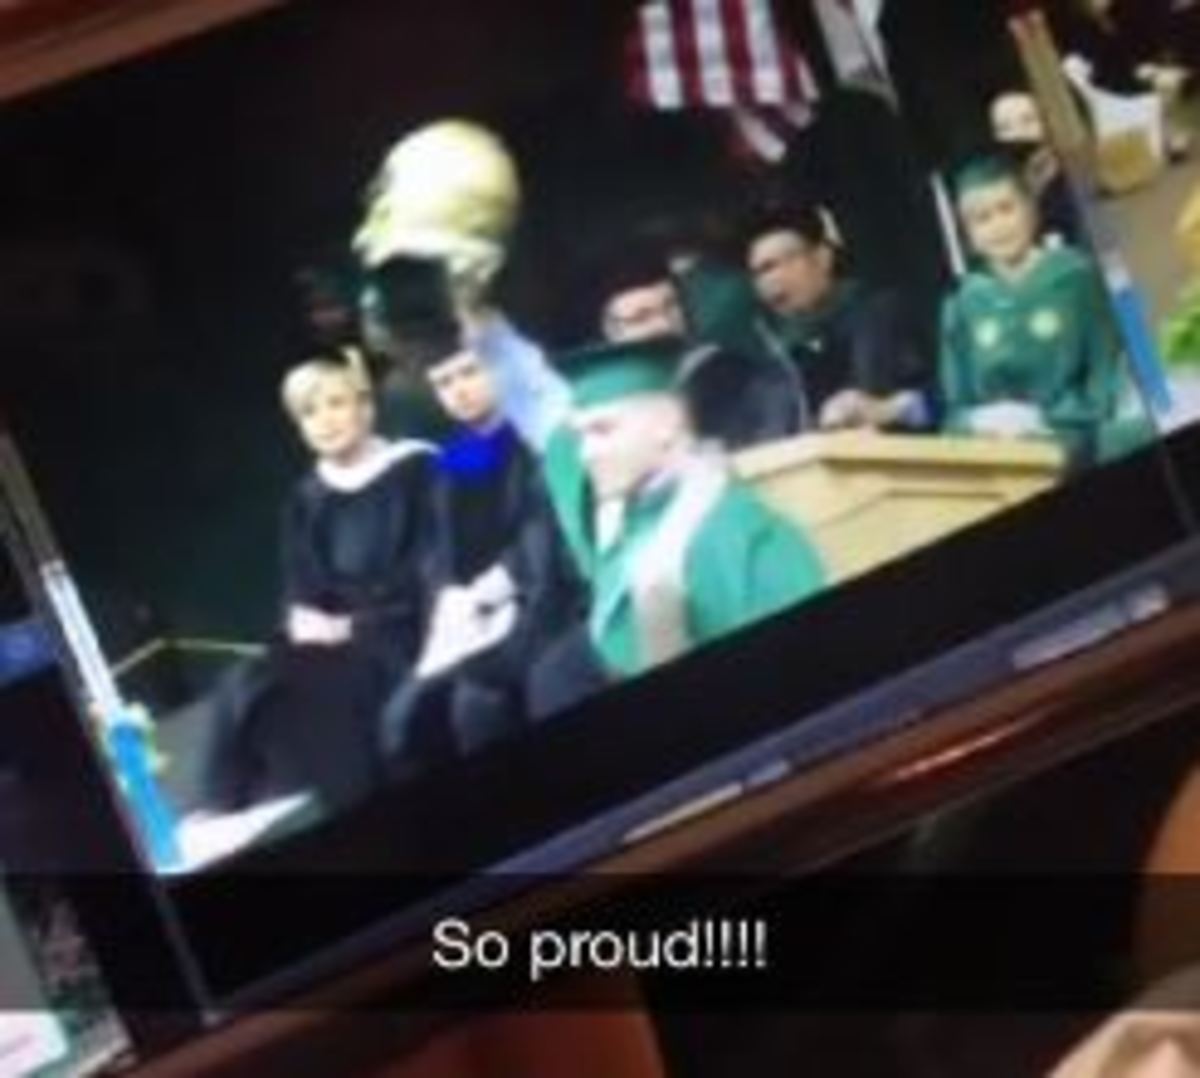 UAB's Derek Slaughter snubs the school president at graduation ceremony, after the Blazers program was dissolved.